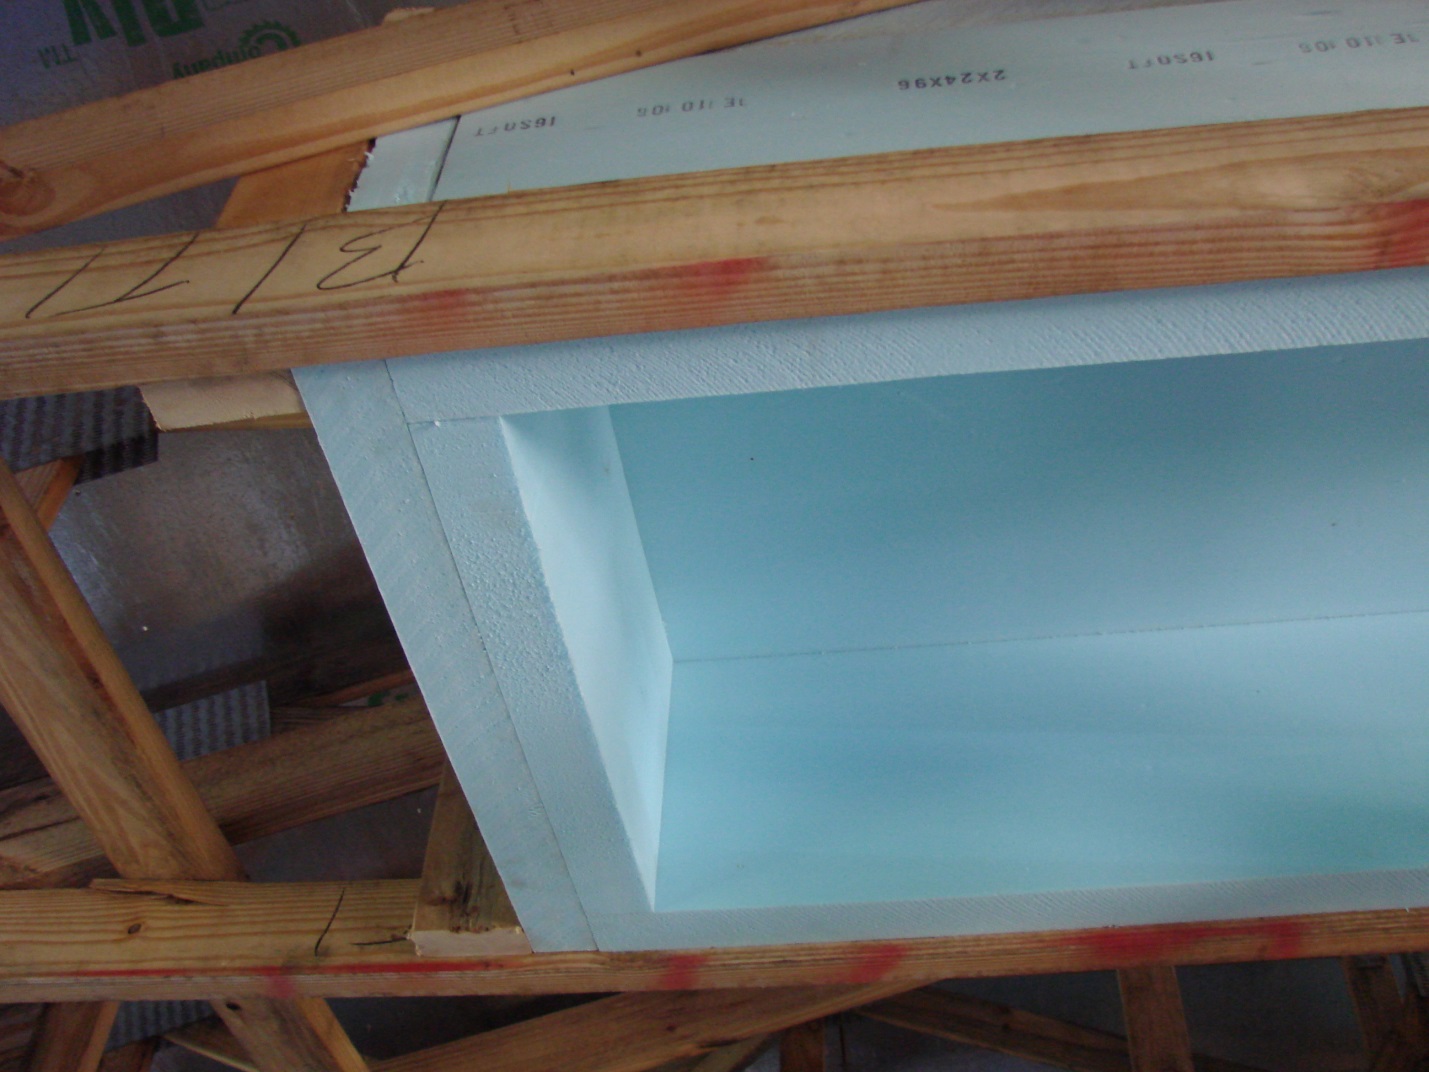 Ducts running parallel to trusses have limited width due to truss spacing.